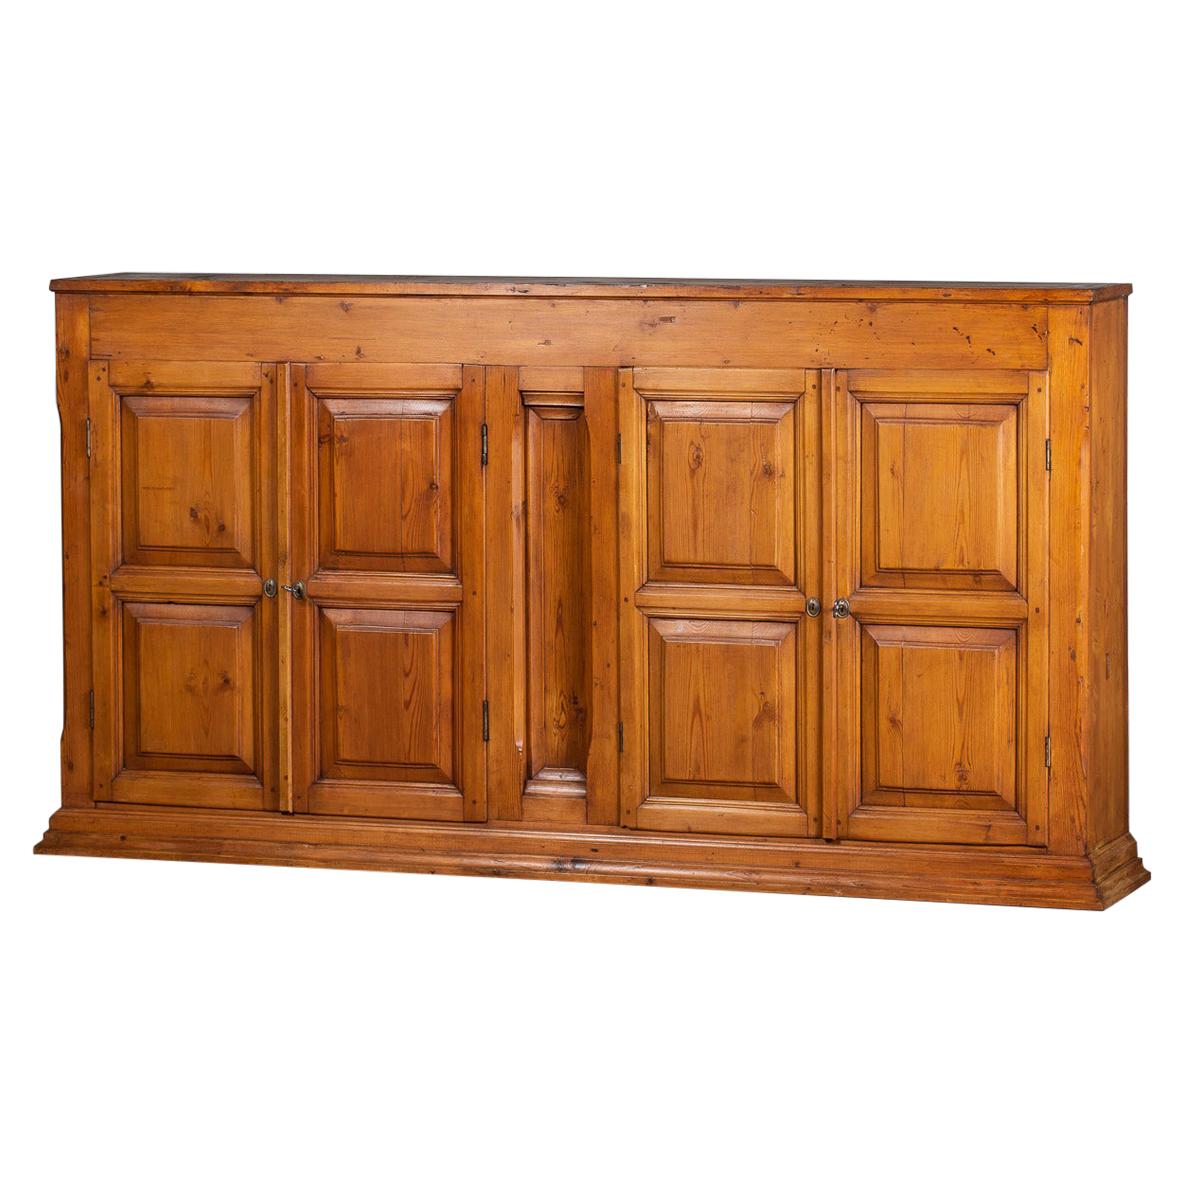 Grand Vintage French Solid Pine Buffet Credenza Cabinet, circa 1930 For Sale